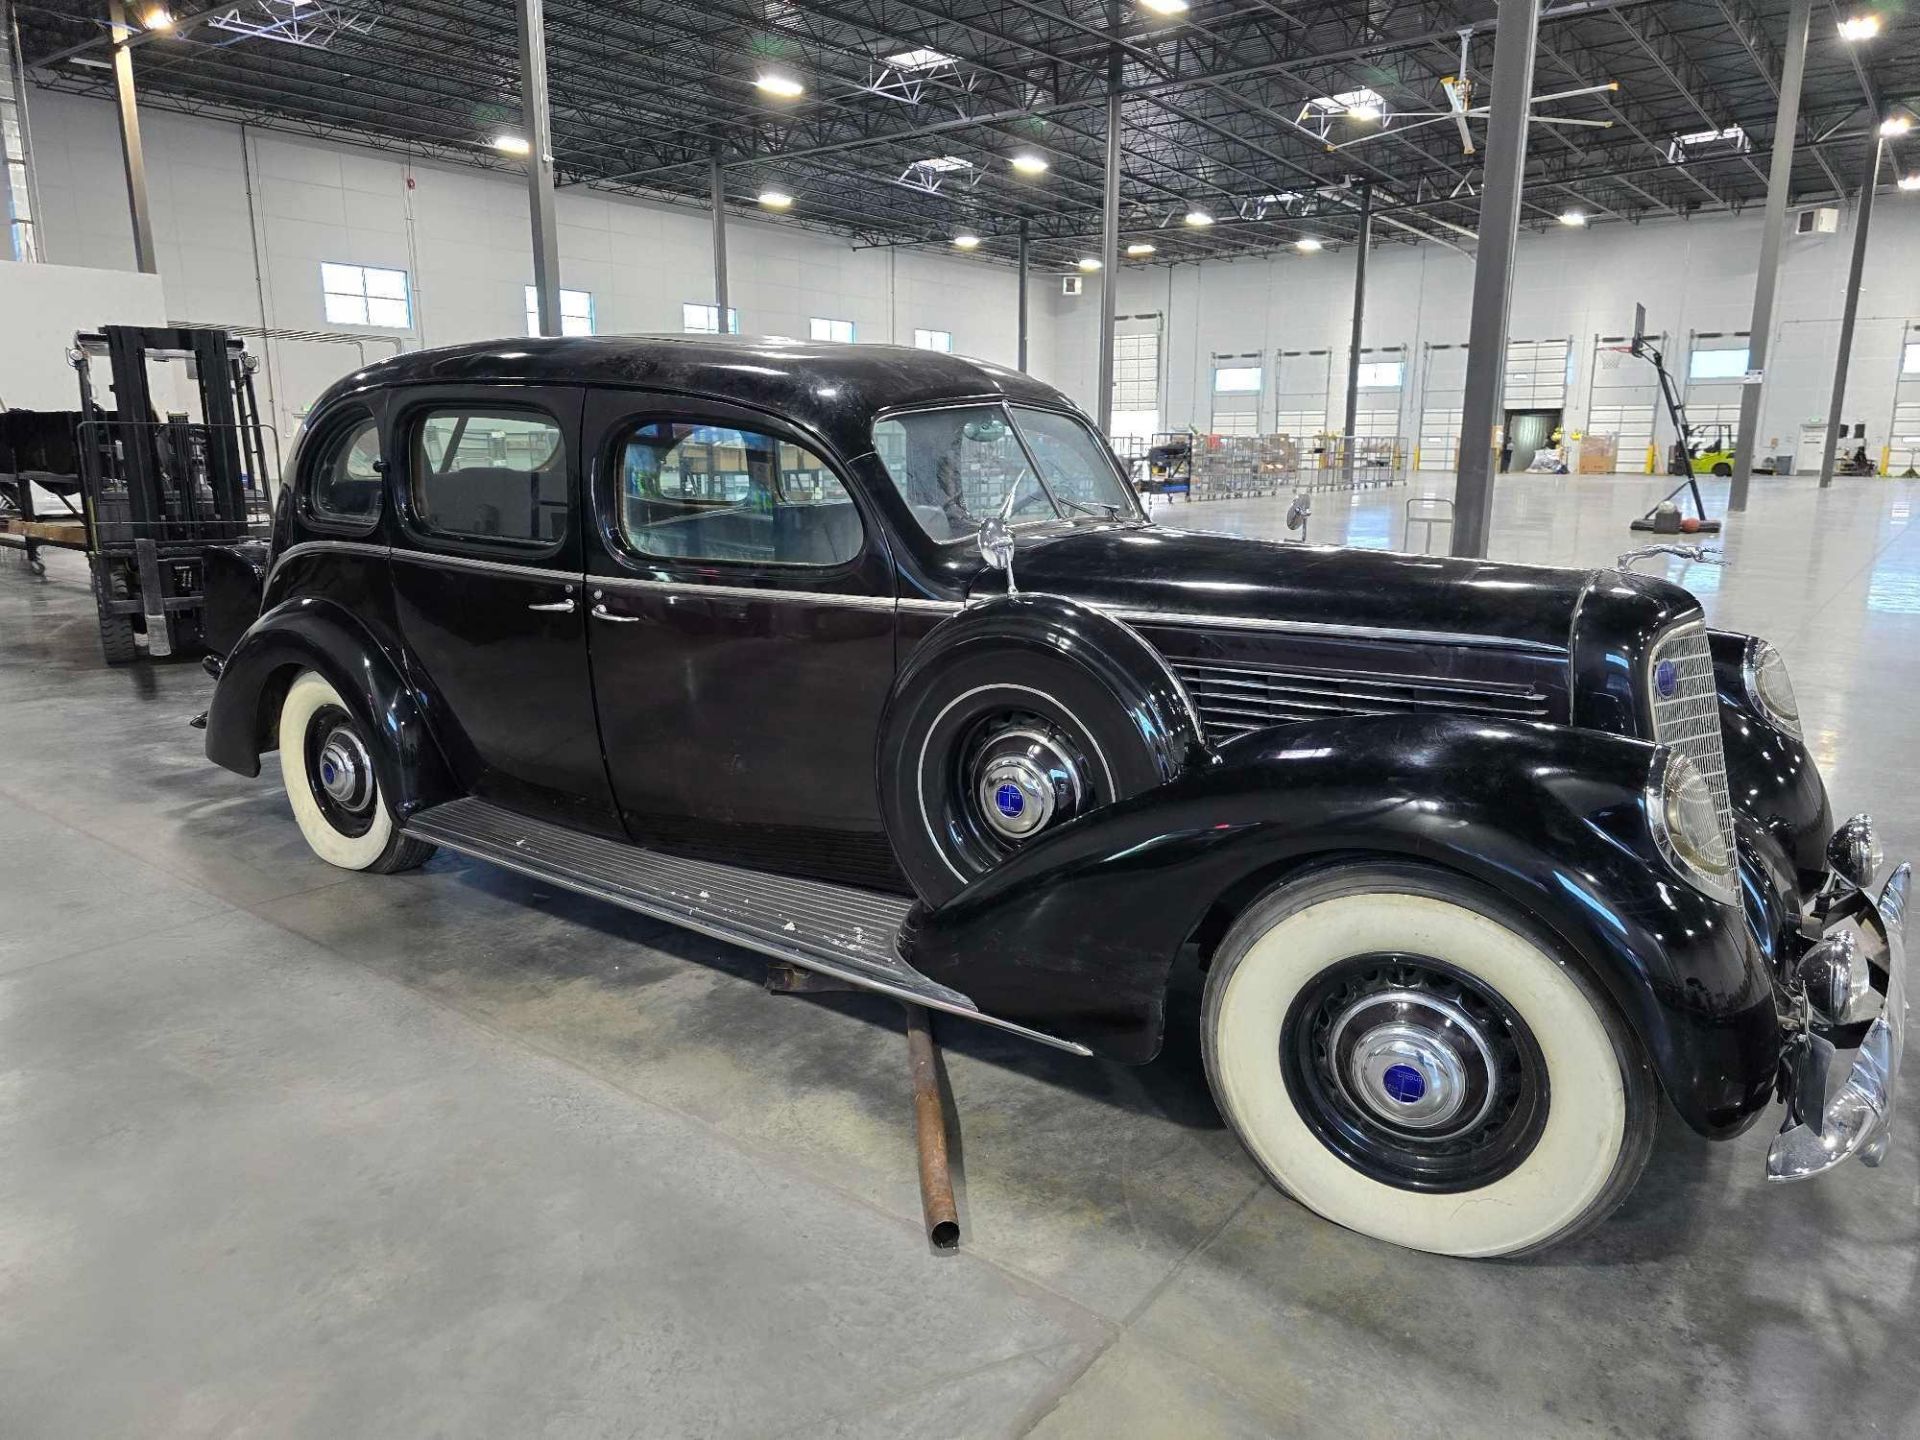 1938 Lincoln Model K v12 (last ran 4 years ago, we believe it needs new gas and a battery)  VIN #K91 - Image 18 of 37